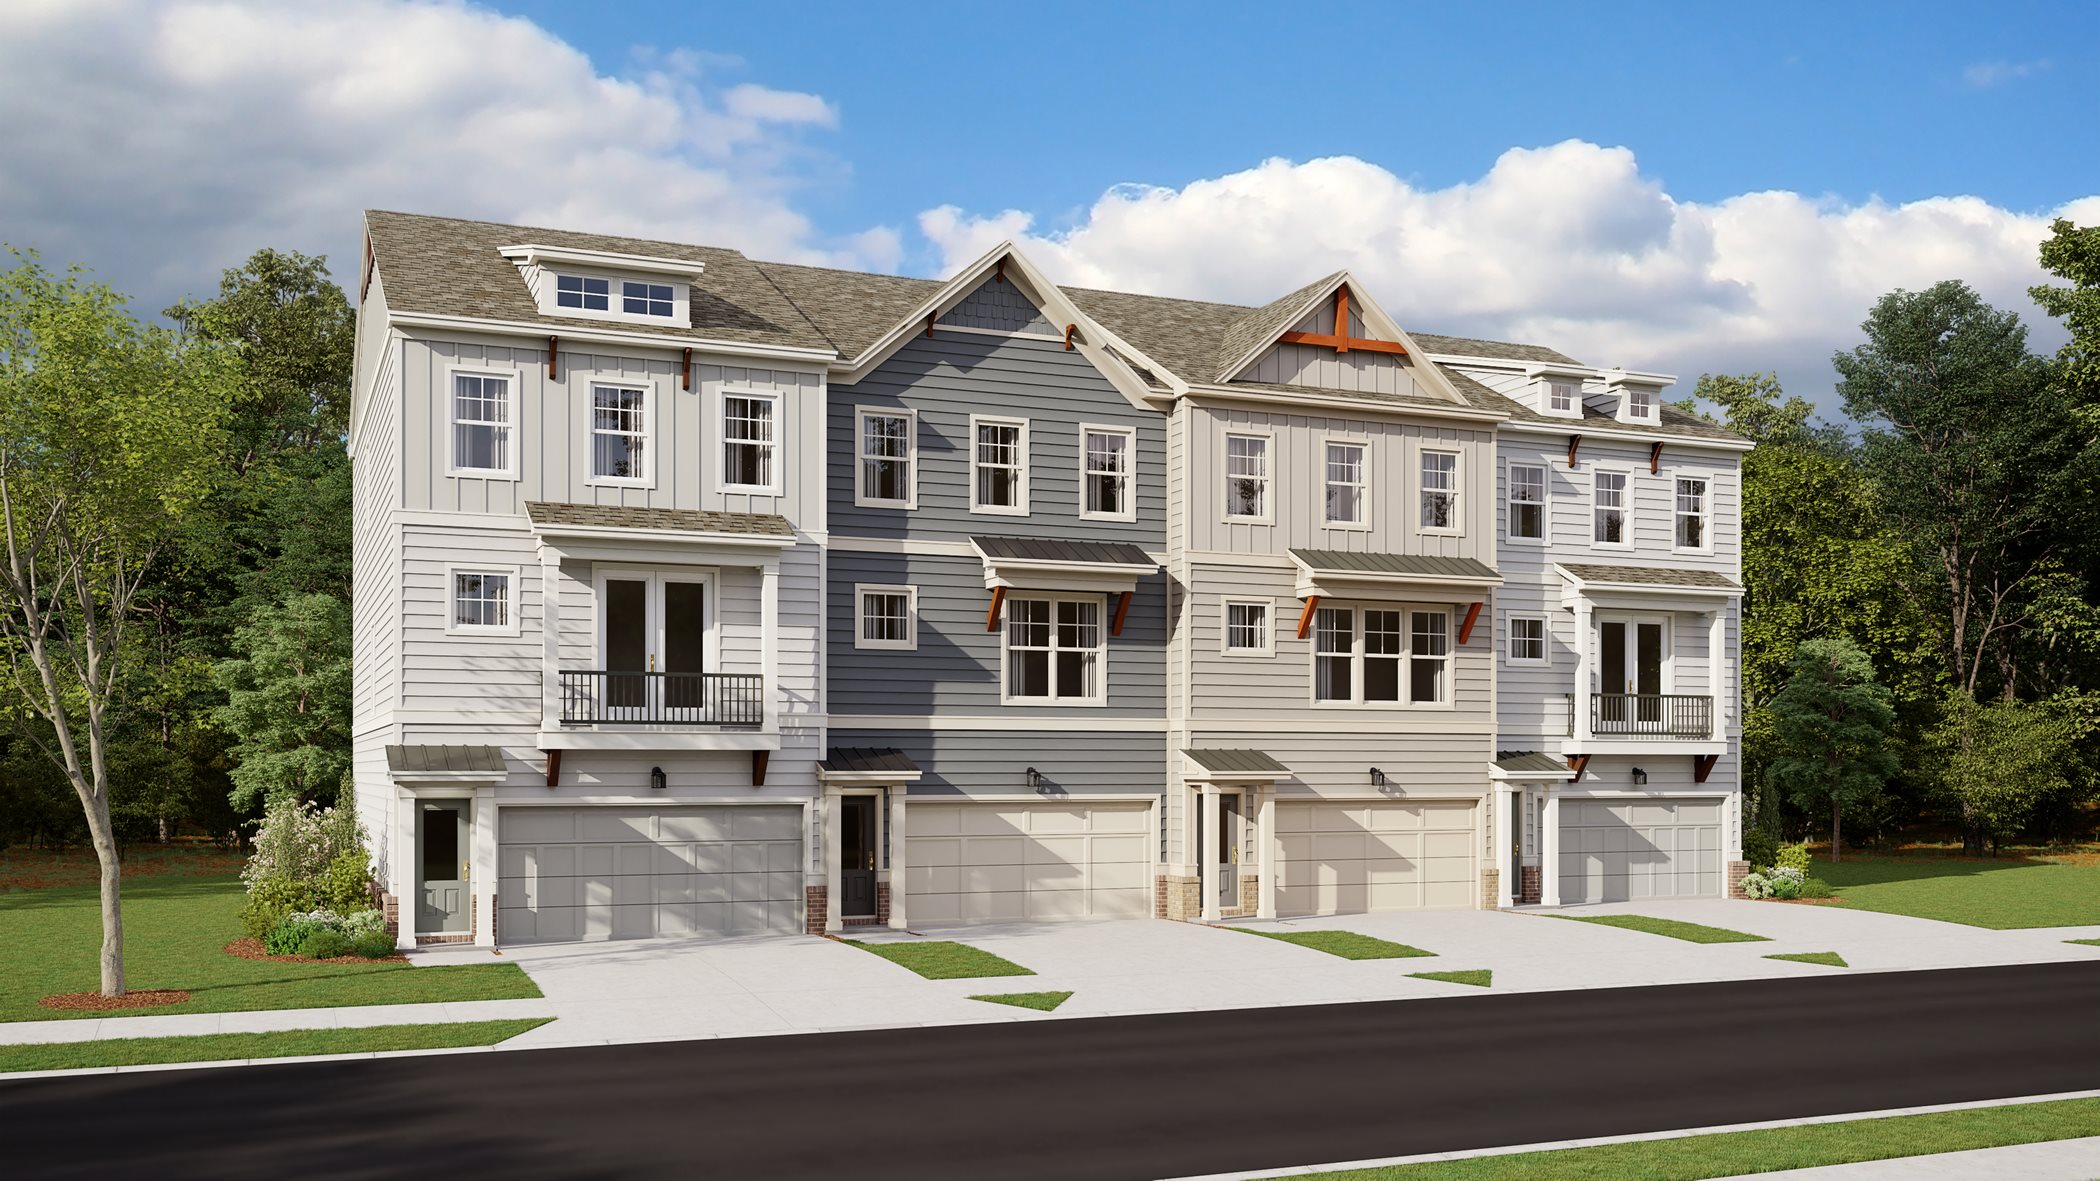 Townhome exteriors at Trinity Park